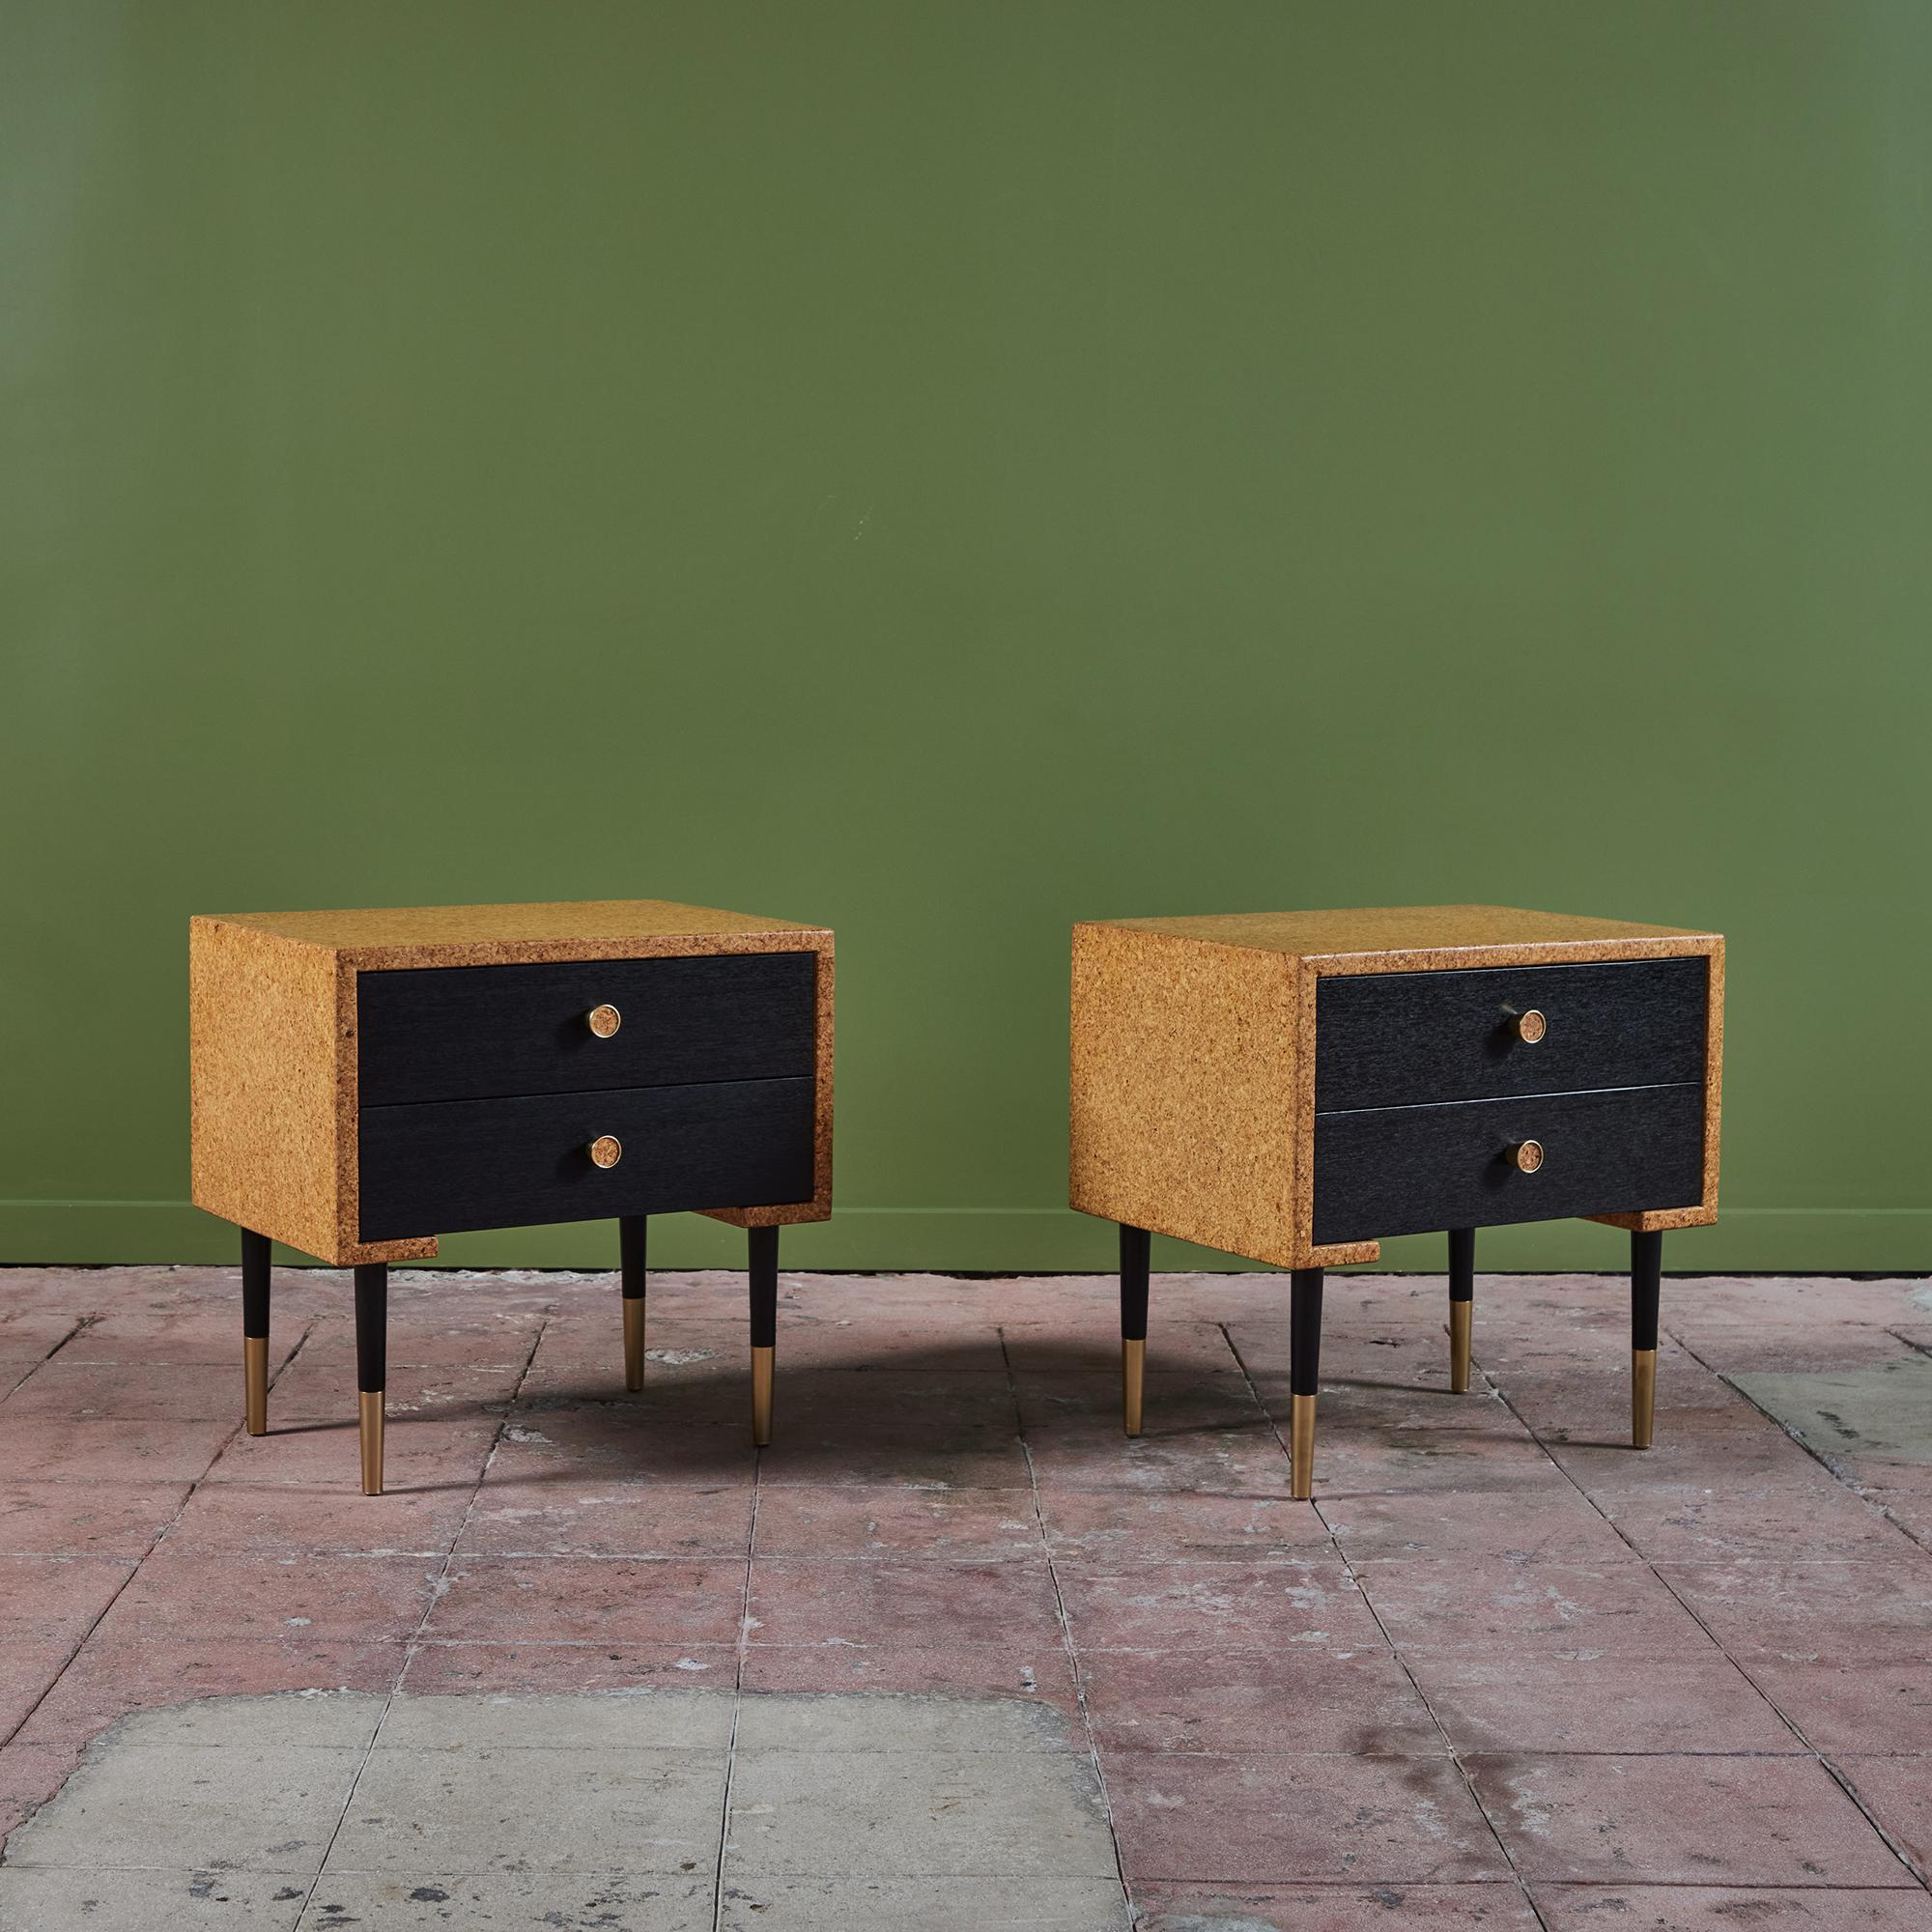 Paul Frankl’s cork furniture pieces are among his longest-lasting contributions to American modernism and are highly sought after to this day. This example, a pair of cork top waterfall edge nightstands designed for and produced by Johnson Furniture